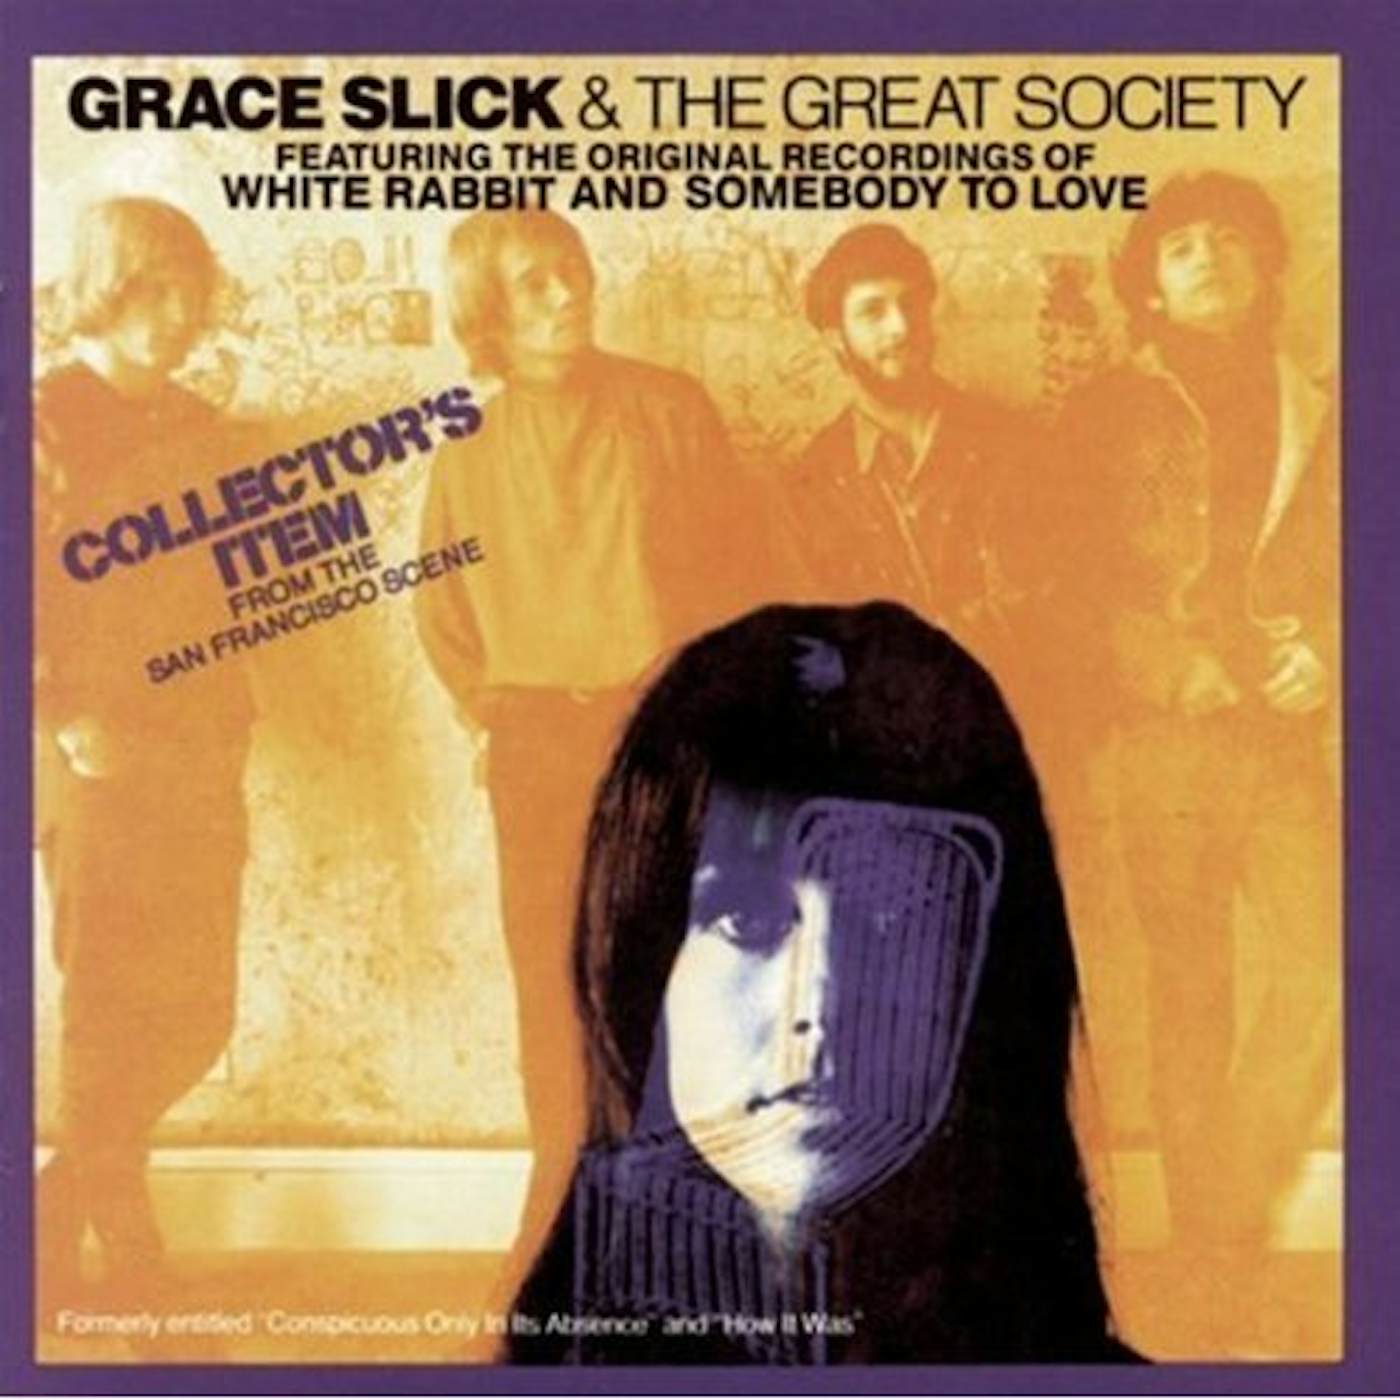 Grace Slick & The Great Society COLLECTORS ITEM CD